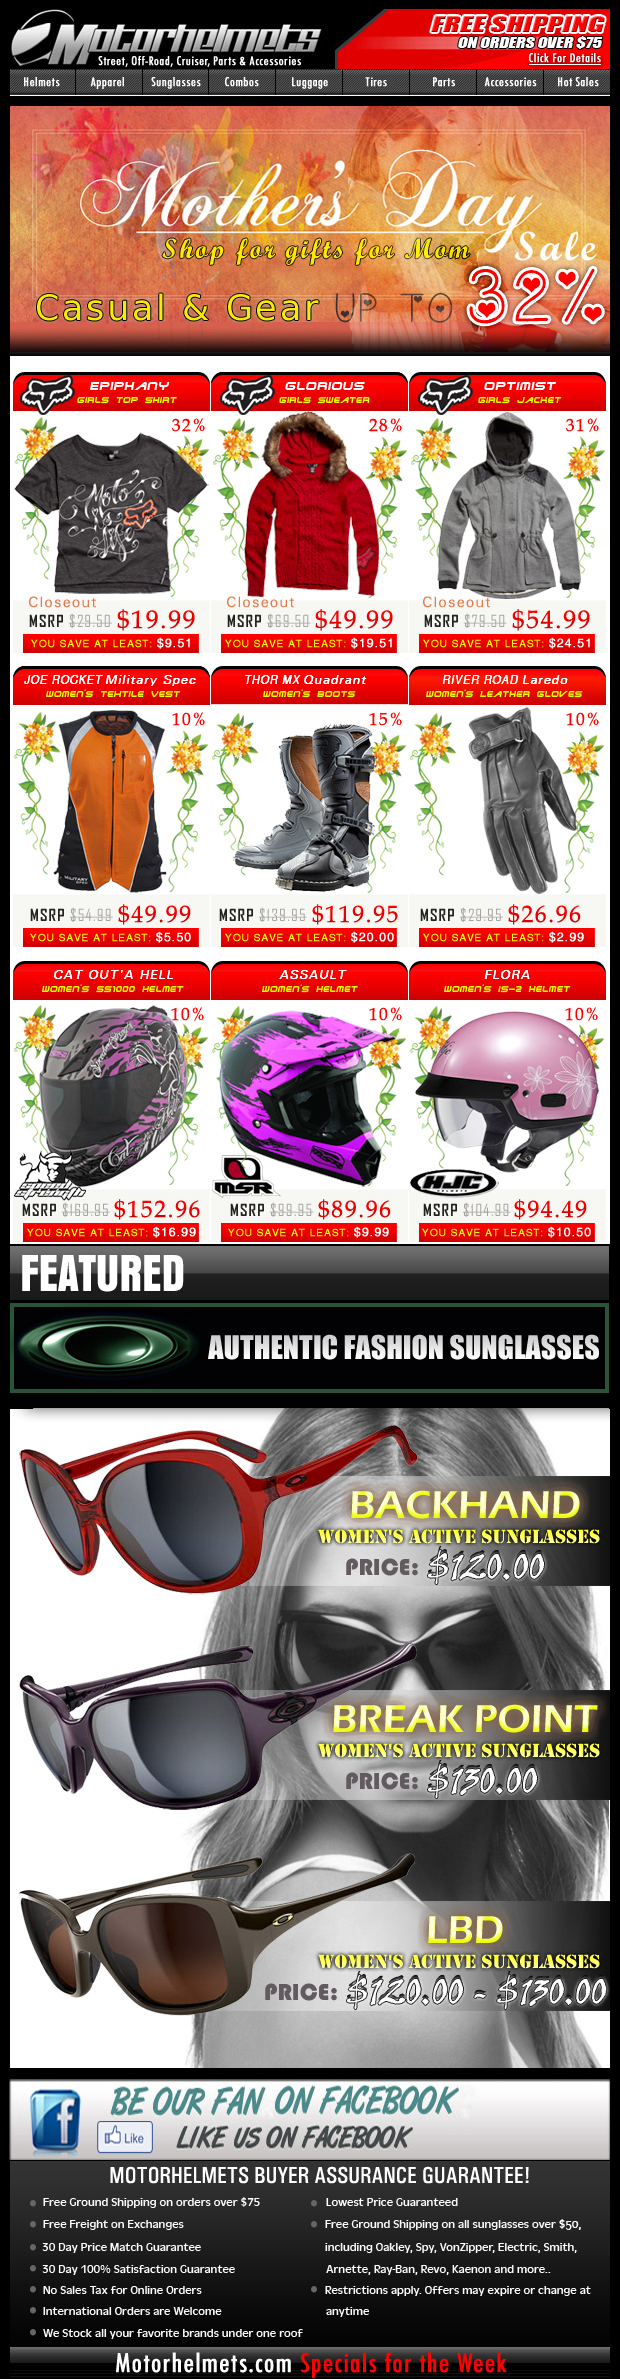 Mother's Day Specials...Up to 32% Off on Premium Items from Fox, MSR, HJC and more!